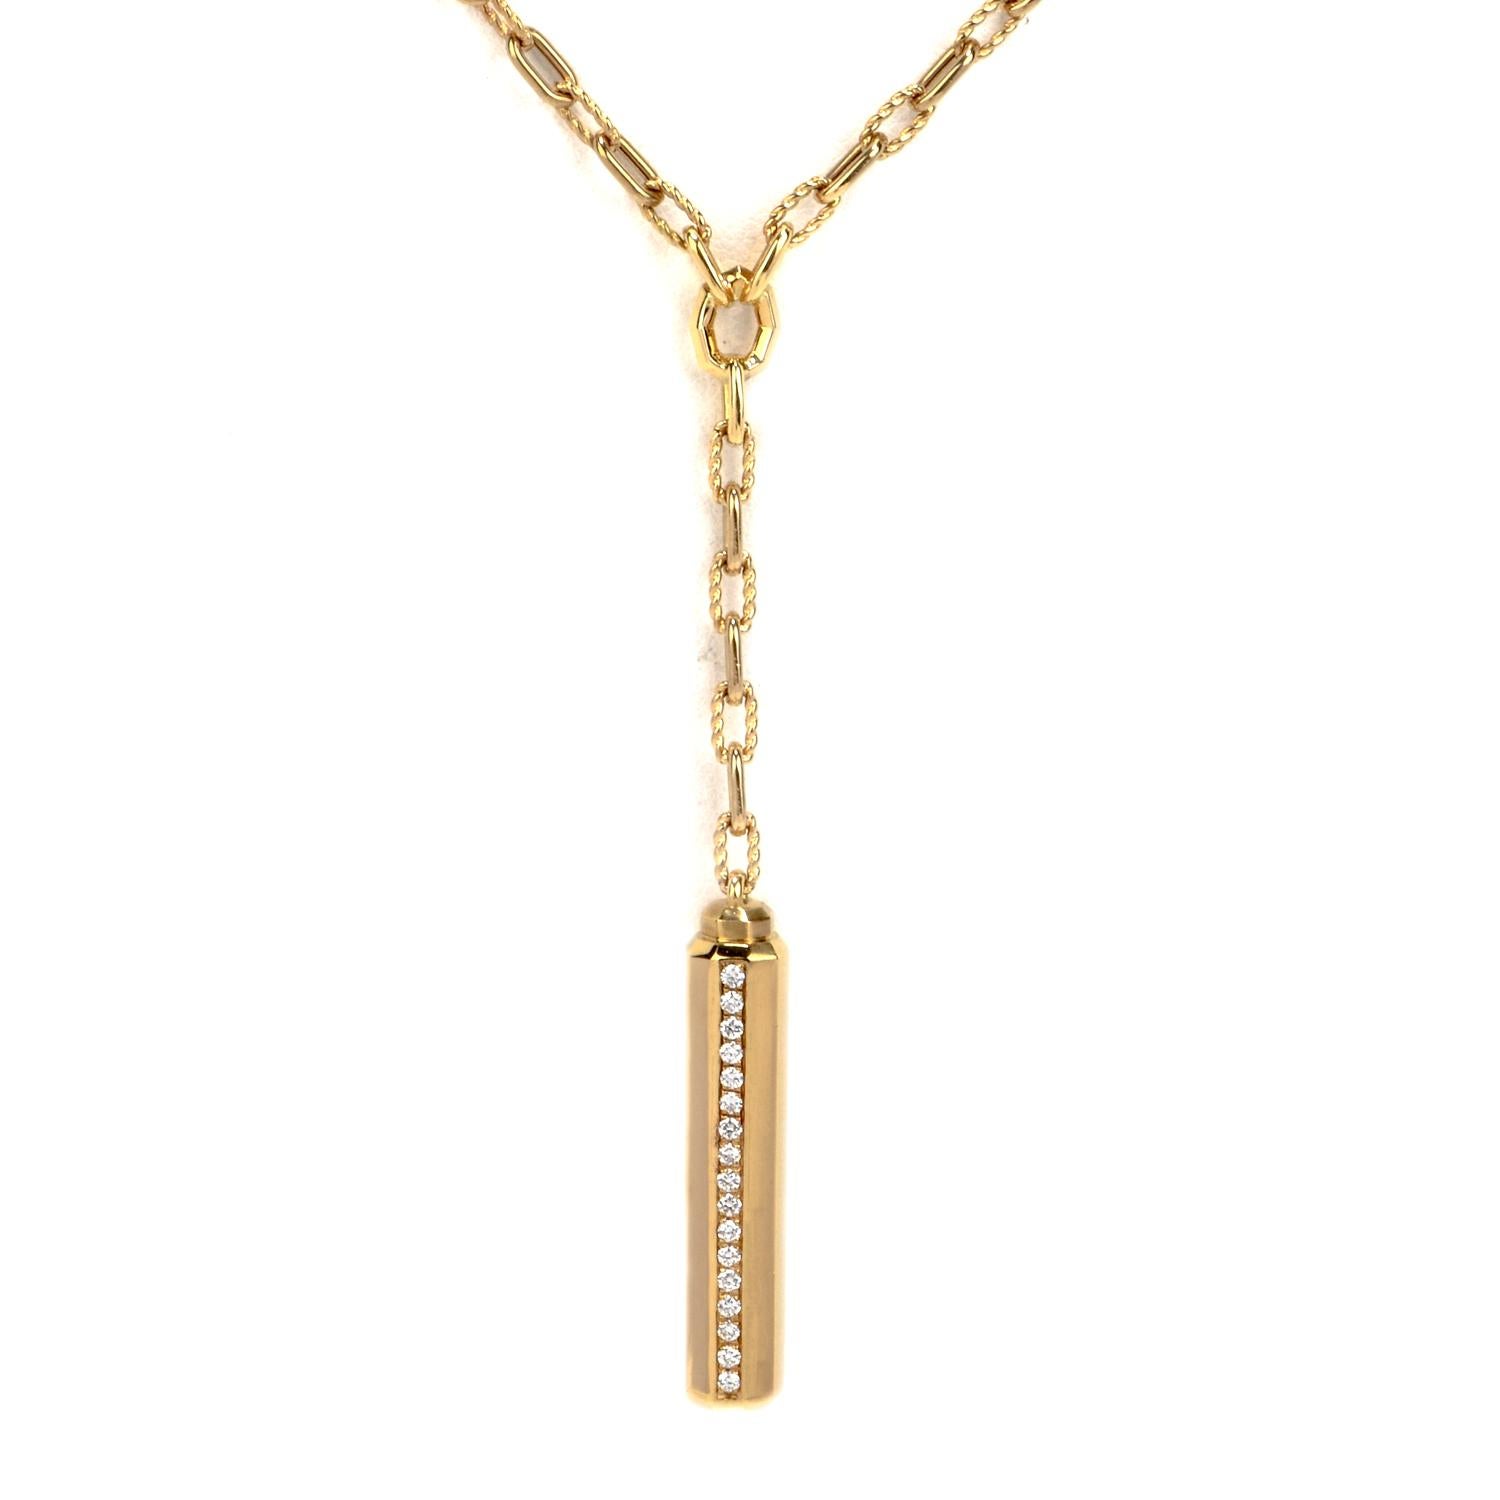 Experience designer luxury with this David Yurman Diamond 18K Gold Barrels Y Necklace.  This necklace has 17 natural pave set diamonds totaling 0.23 carats.  The diamonds radiate in this 18K yellow gold classy necklace.  The clasp is a toggle clasp